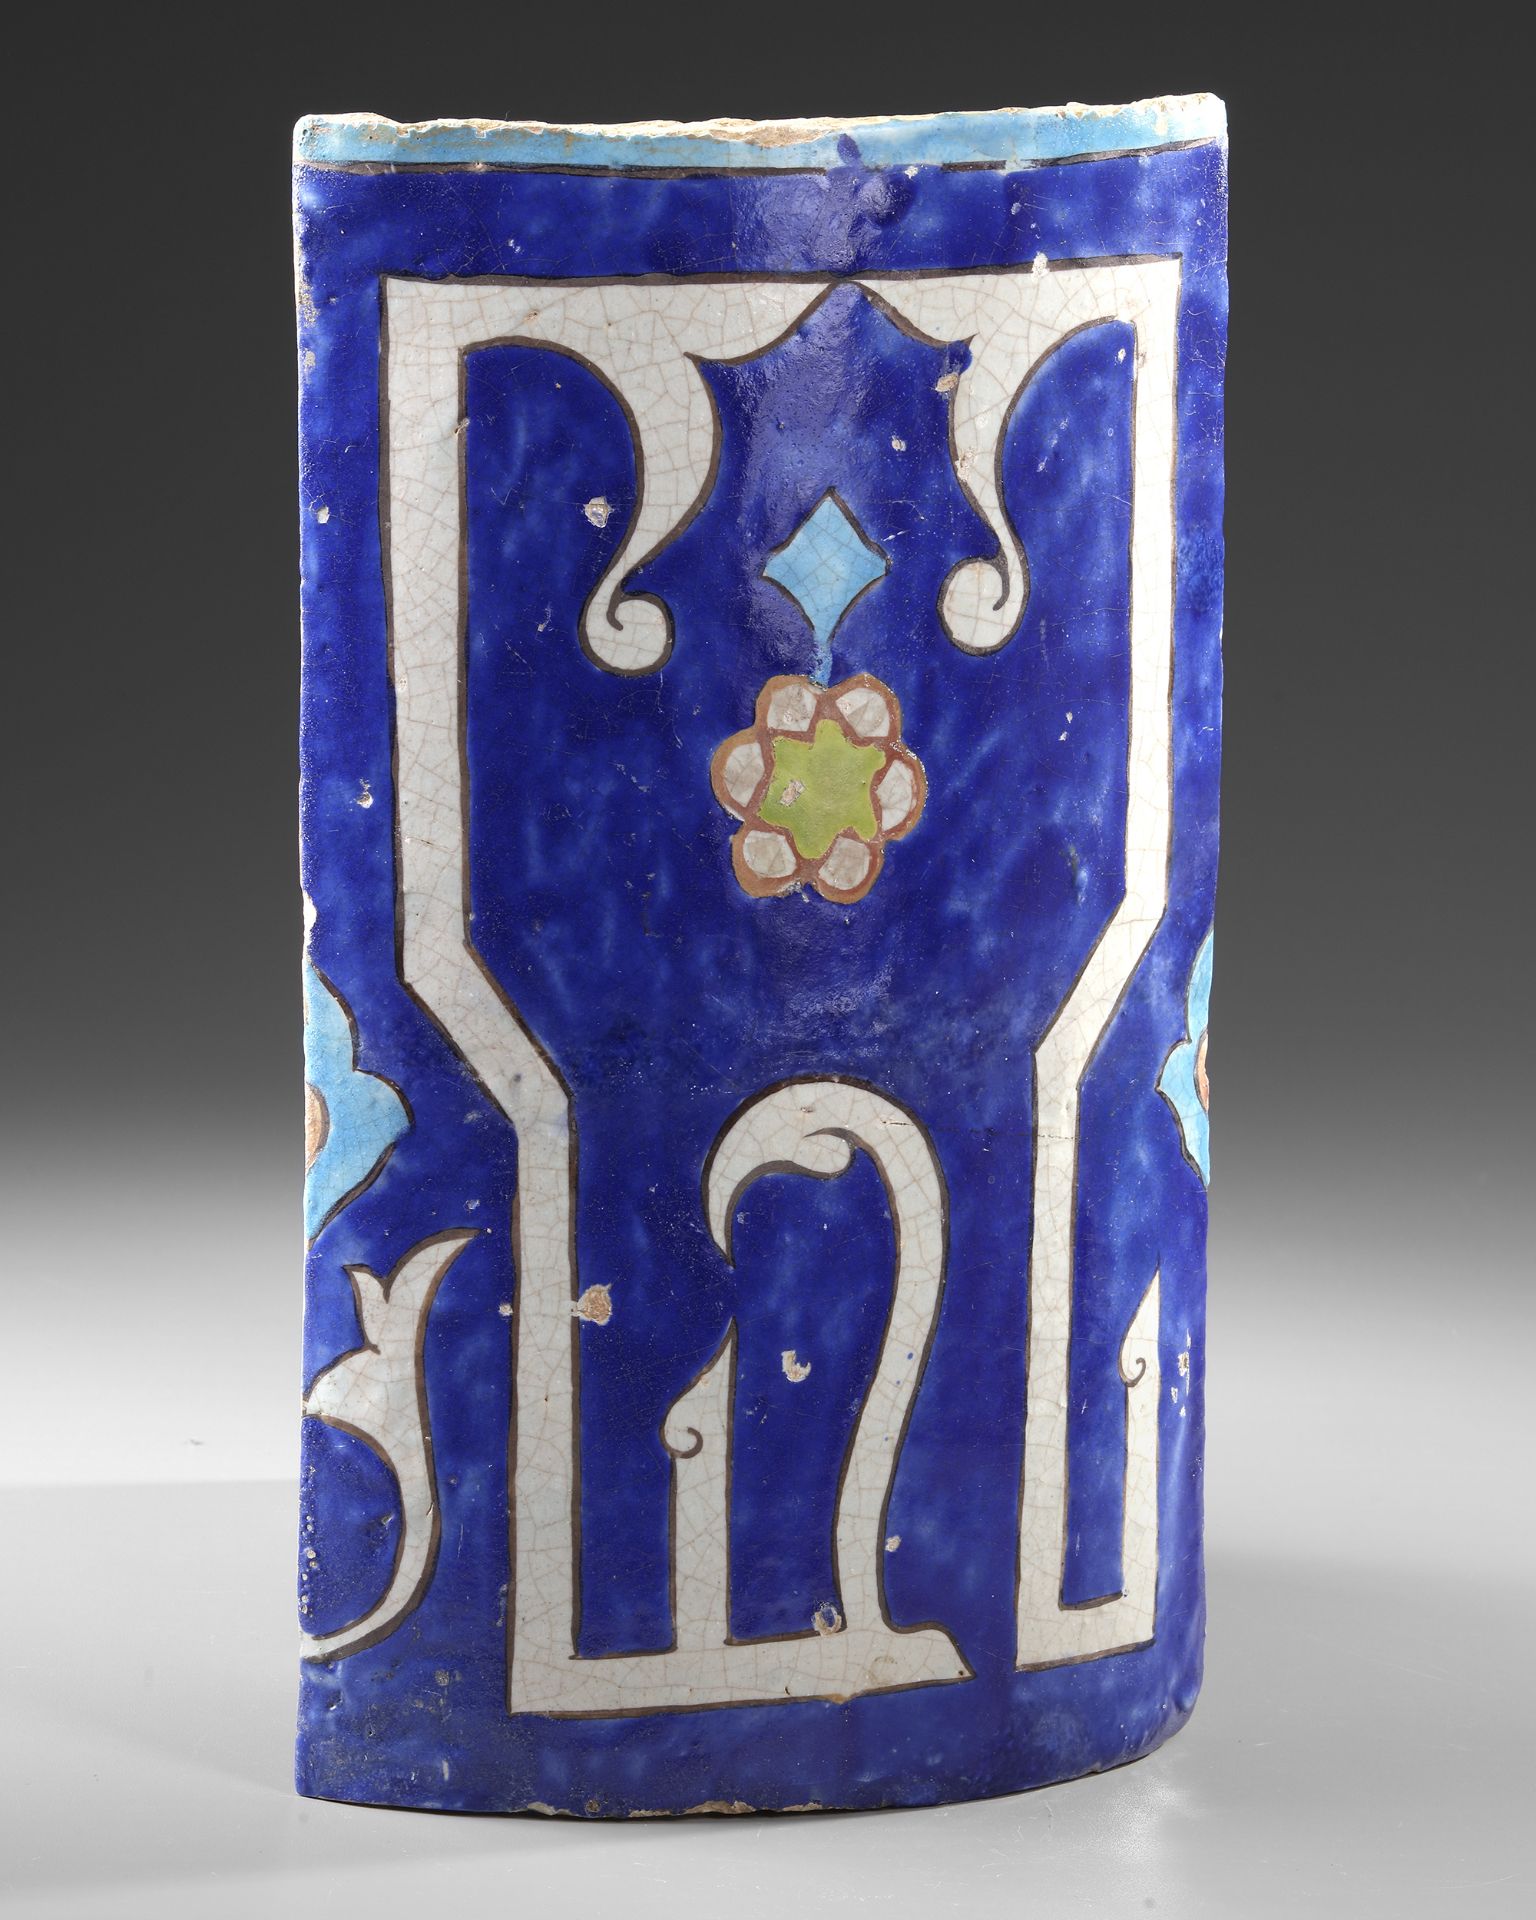 A TIMURID CALLIGRAPHIC POTTERY TILE, CENTRAL ASIA OR EASTERN PERSIA, 14TH-15TH CENTURY - Image 6 of 10